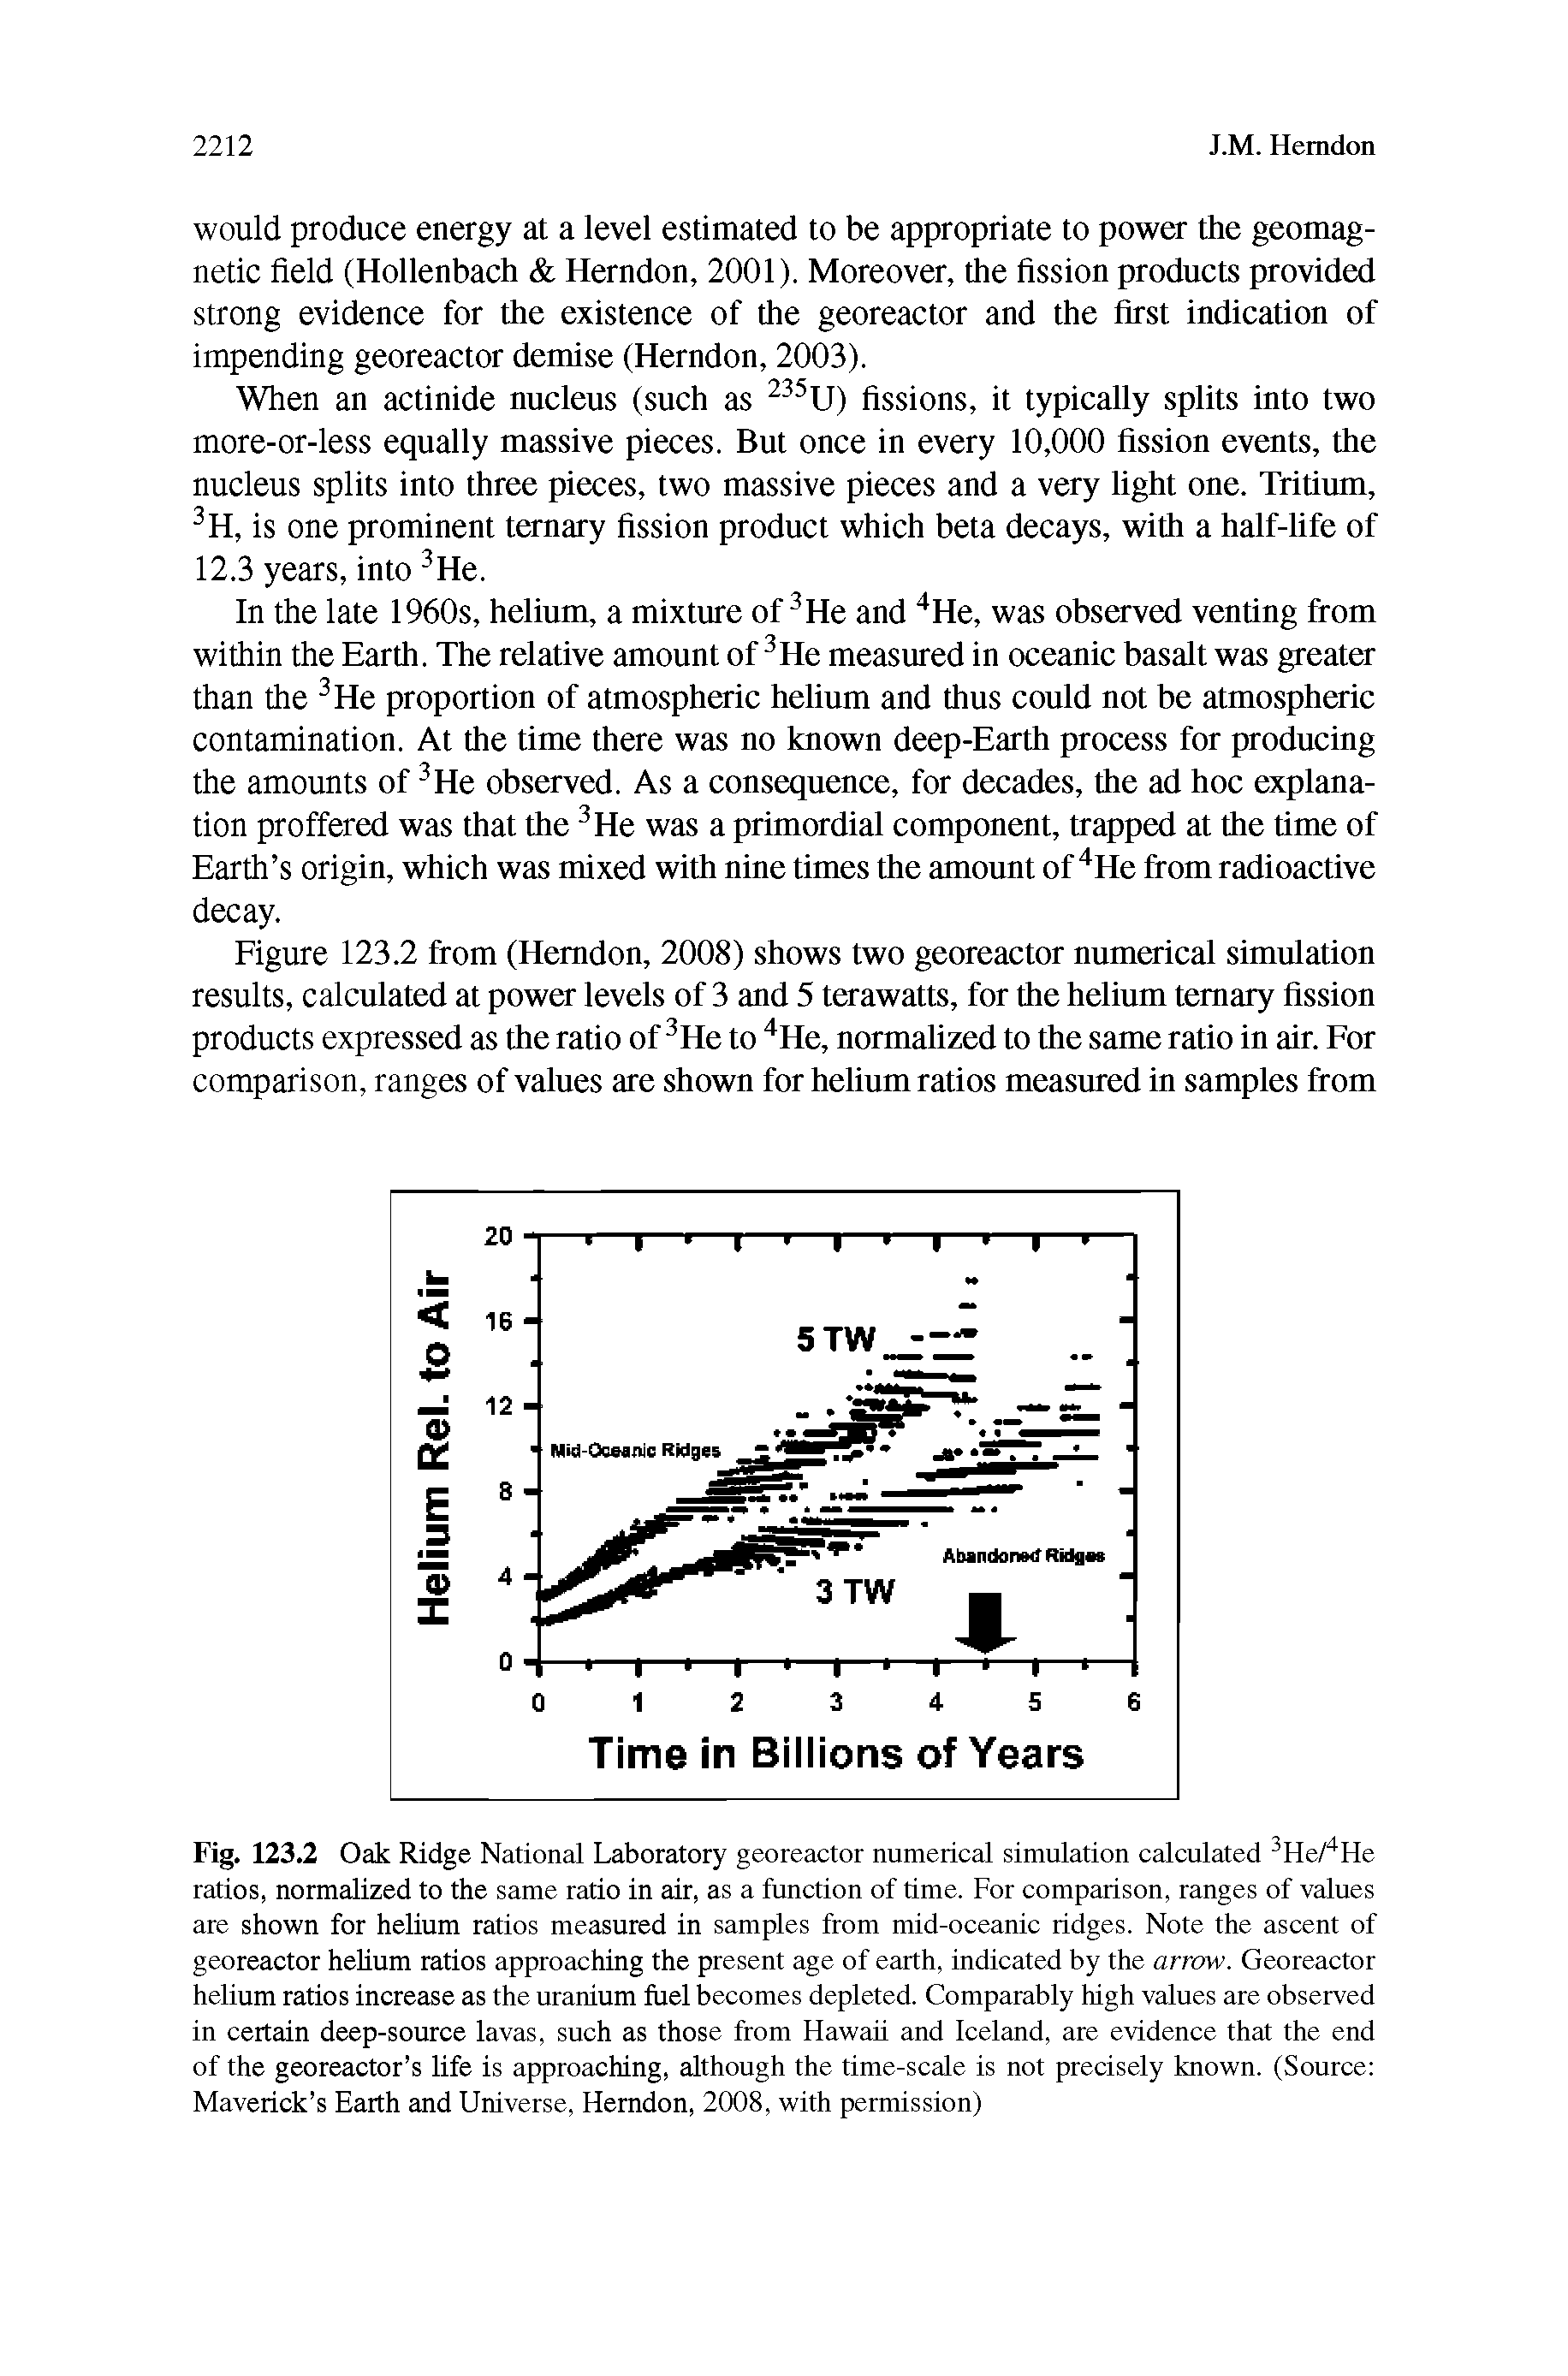 Fig. 123.2 Oak Ridge National Laboratory georeactor numerical simulation calculated He/ He ratios, normalized to the same ratio in air, as a function of time. For comparison, ranges of values are shown for helium ratios measured in samples from mid-oceanic ridges. Note the ascent of georeactor hehum ratios approaching the present age of earth, indicated by the arrow. Georeactor helium ratios increase as the uranium fuel becomes depleted. Comparably high values are observed in certain deep-source lavas, such as those from Hawaii and Iceland, are evidence that the end of the georeactor s life is approaching, although the time-scale is not precisely known. (Source Maverick s Earth and Universe, Herndon, 2008, with permission)...